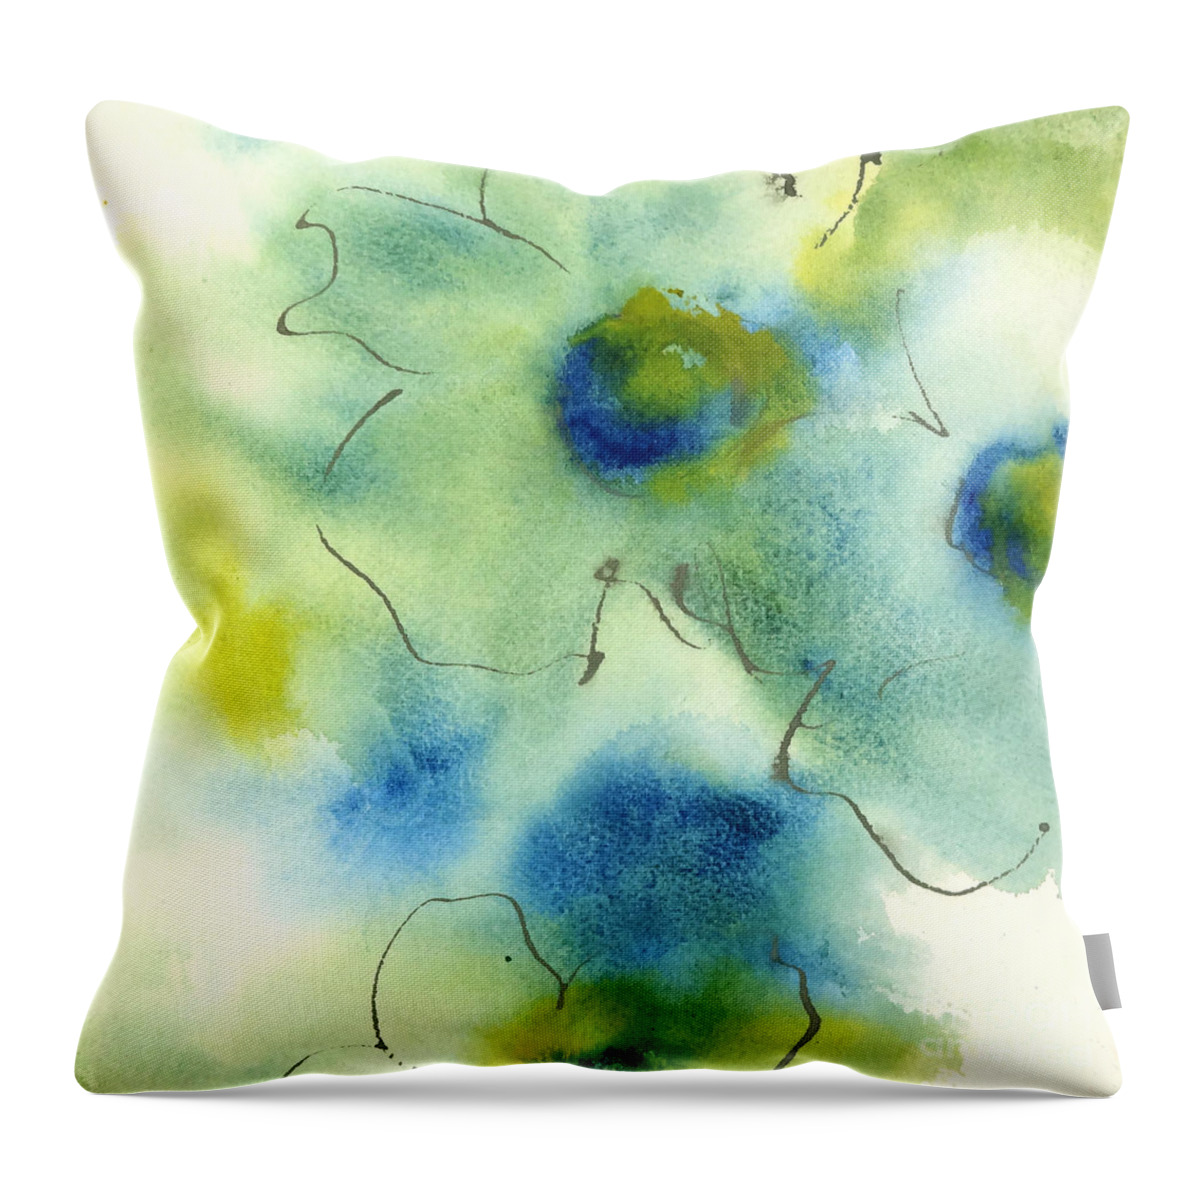 Original Watercolors Throw Pillow featuring the painting Essence Of Poppy II by Chris Paschke